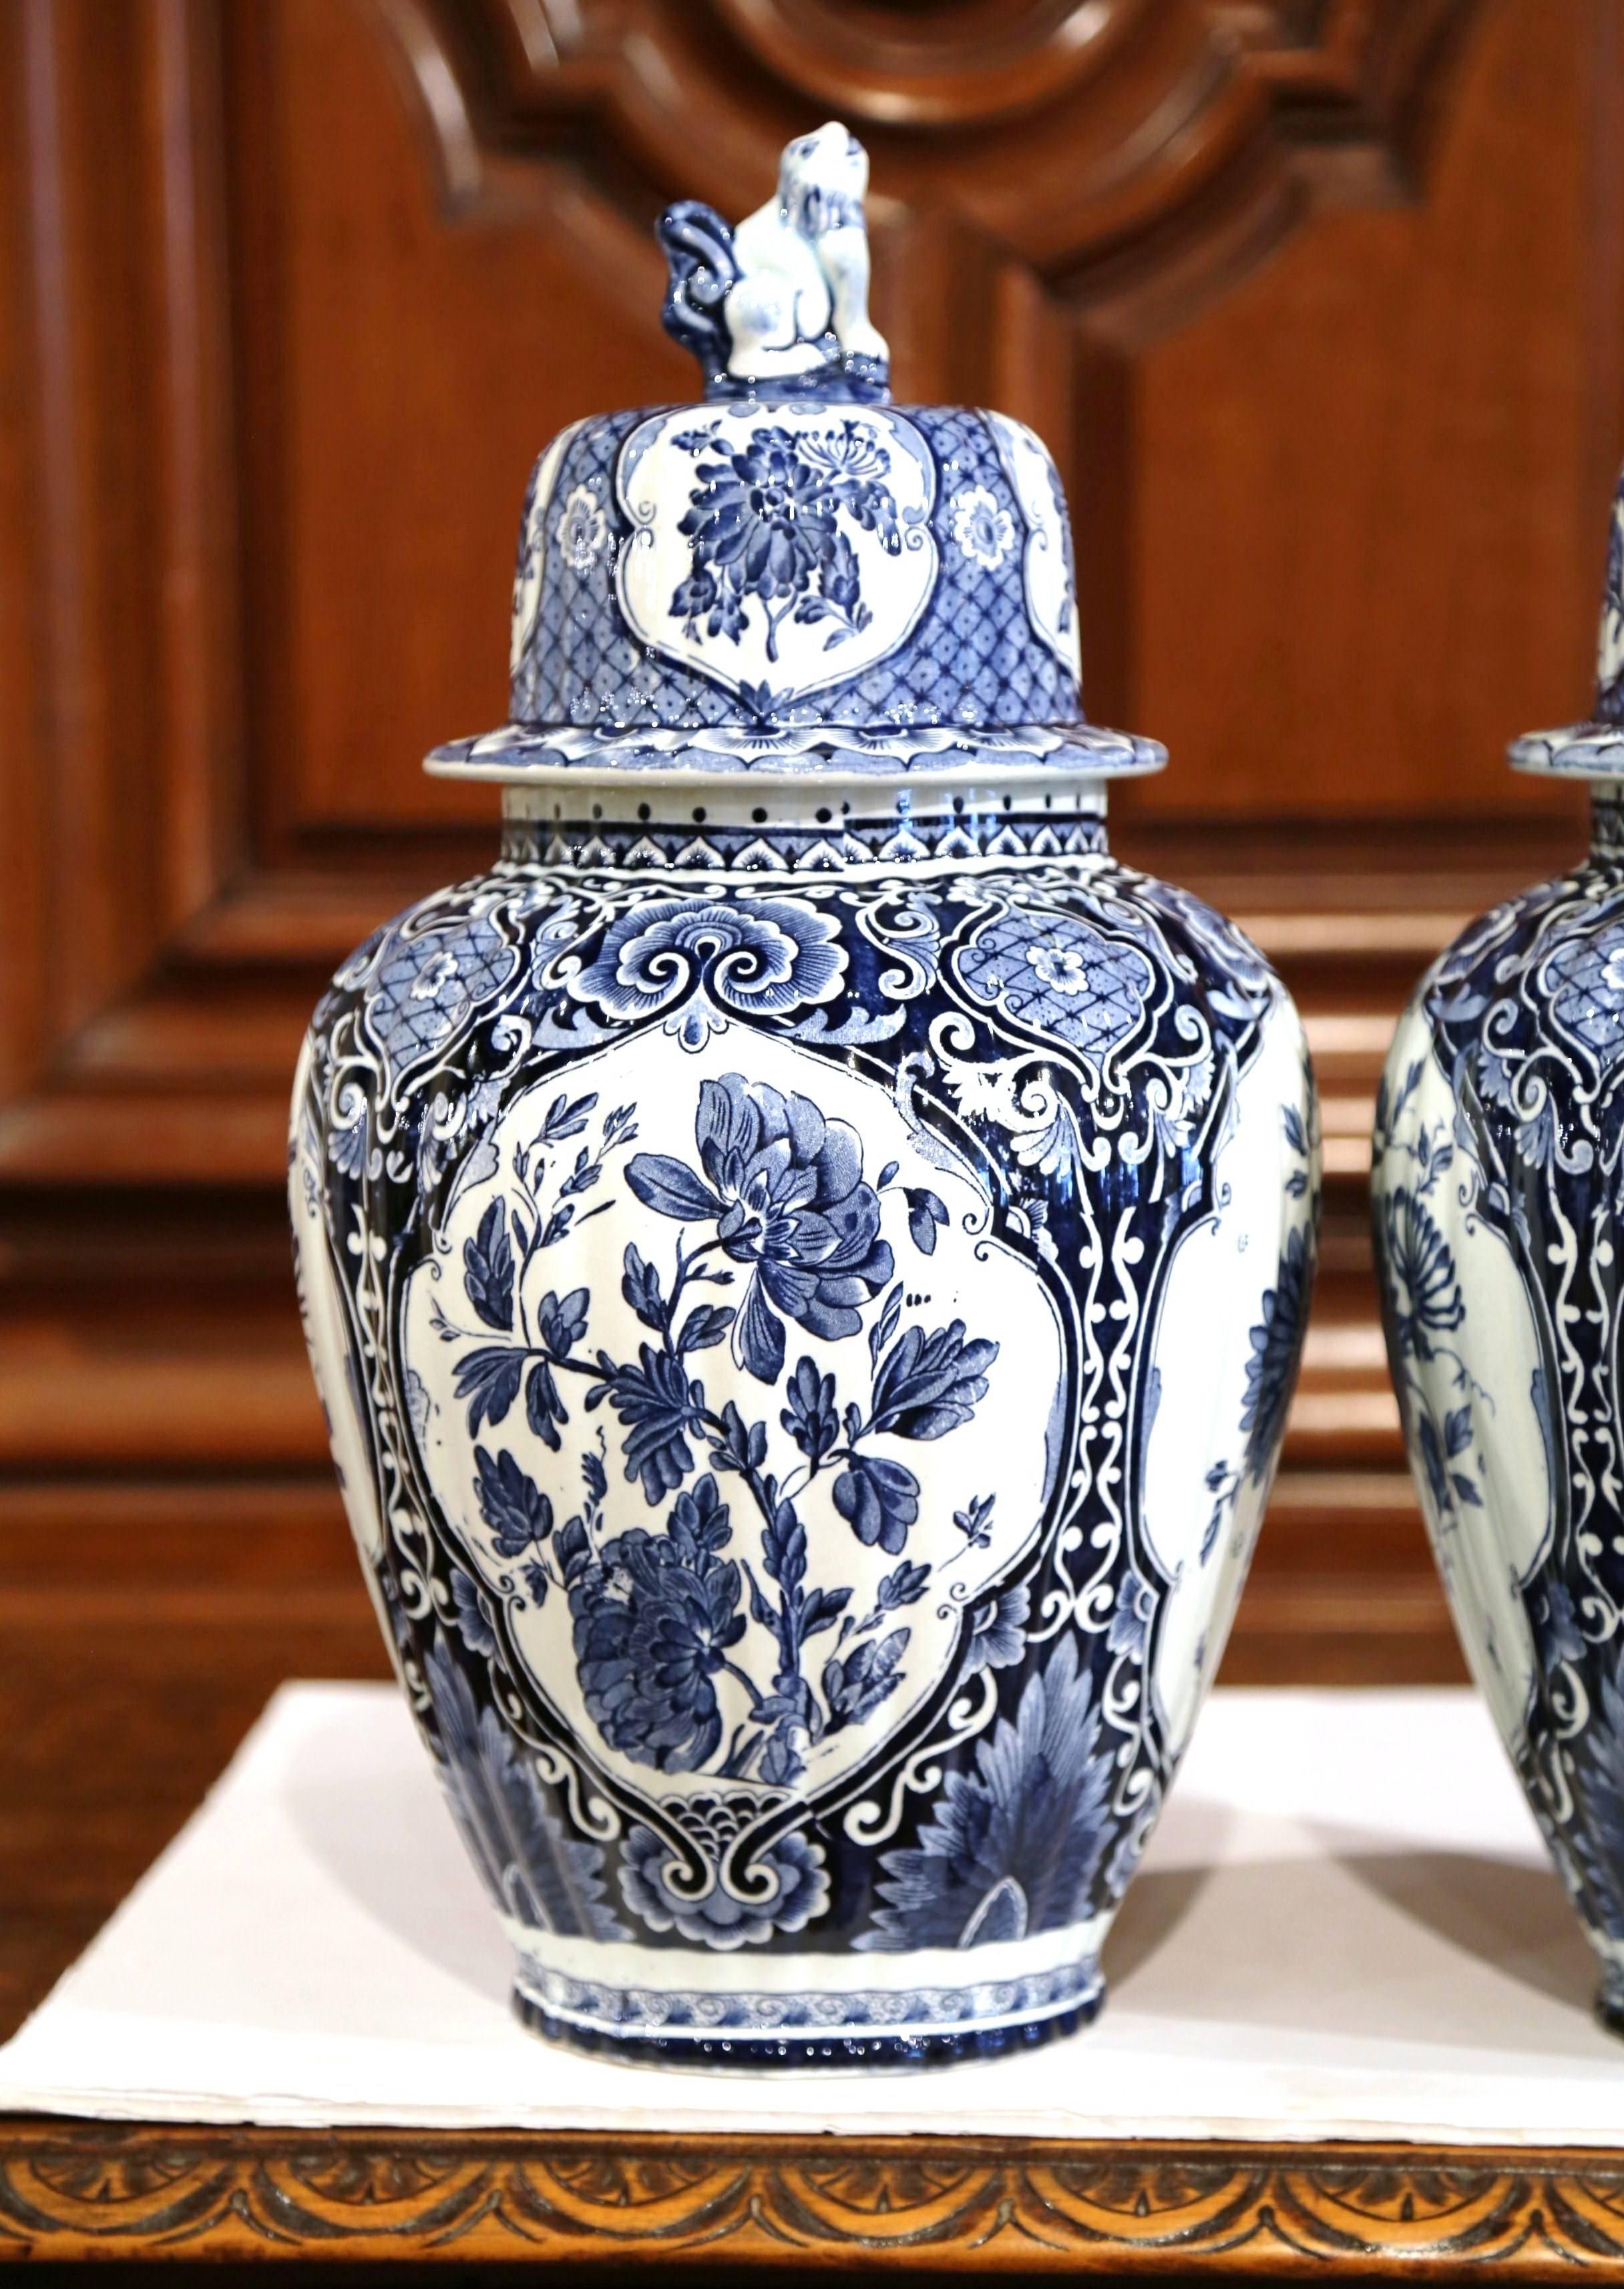 This large and elegant pair of vintage ceramic ginger jars was created in Holland, circa 1950. The faience potiches feature hand-painted medallions with Classic Dutch flowers and foliage. The traditional blue and white jars have a dome lid